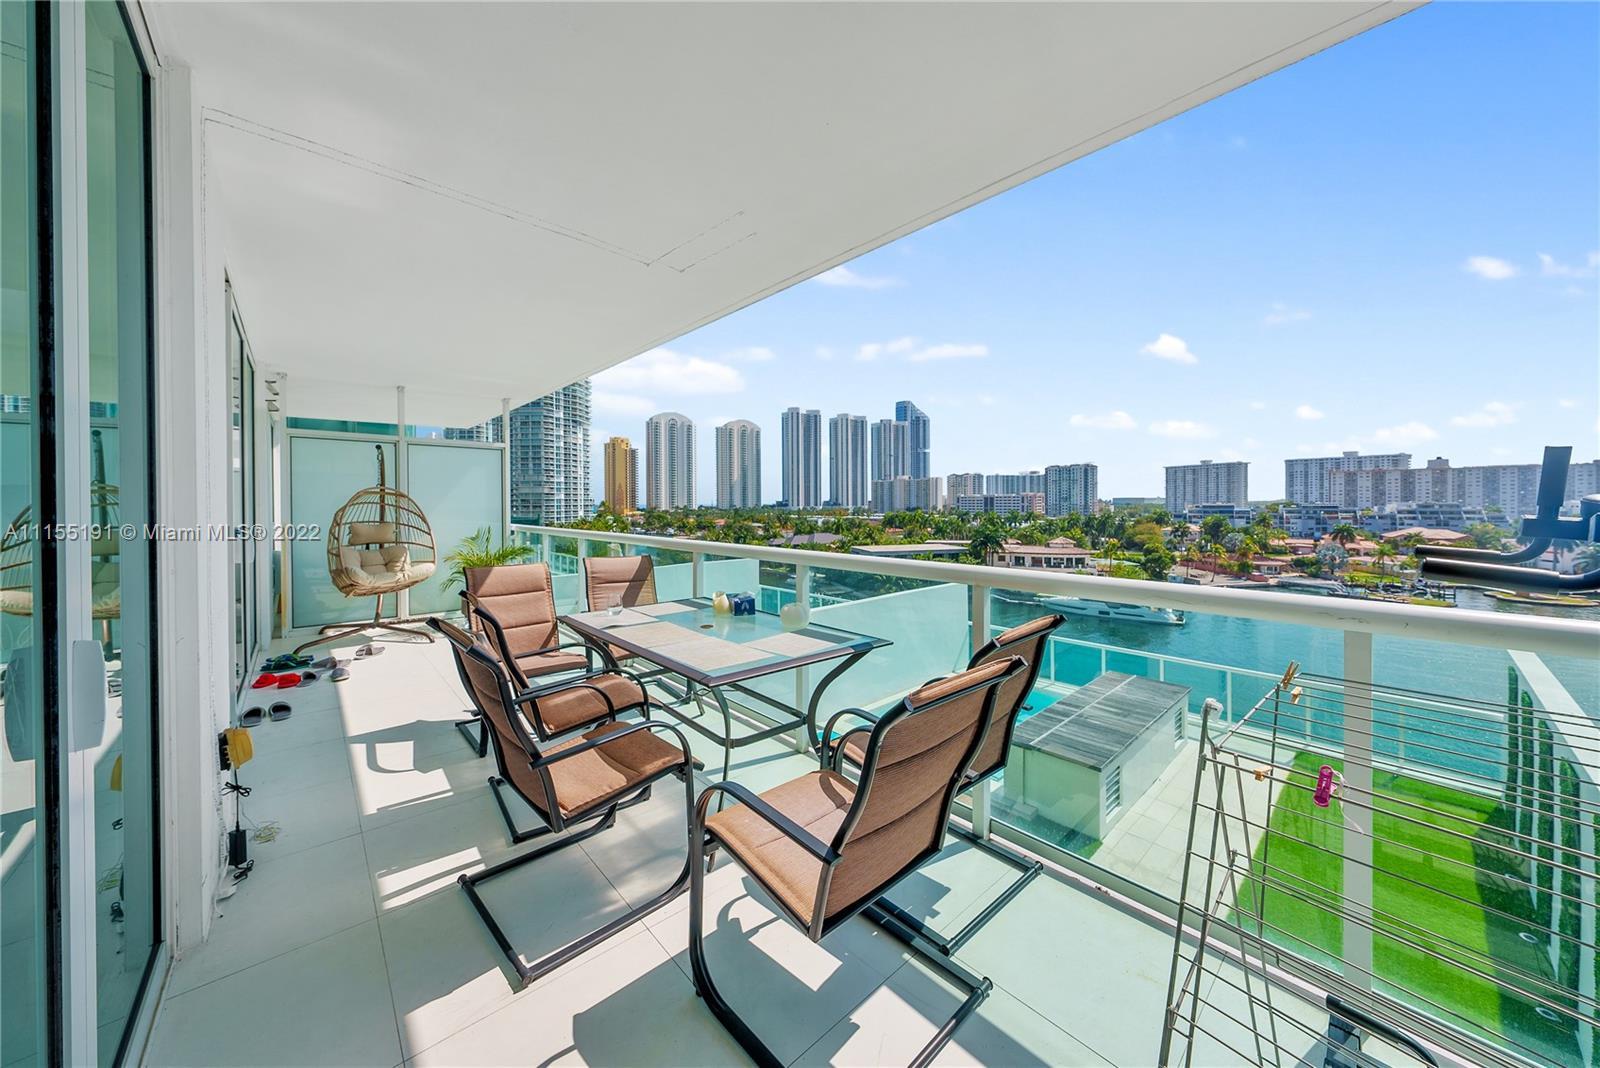 Most desirable model C at 400 Sunny Isles. Unobstructed panoramic water views from this 1 bedroom+ h